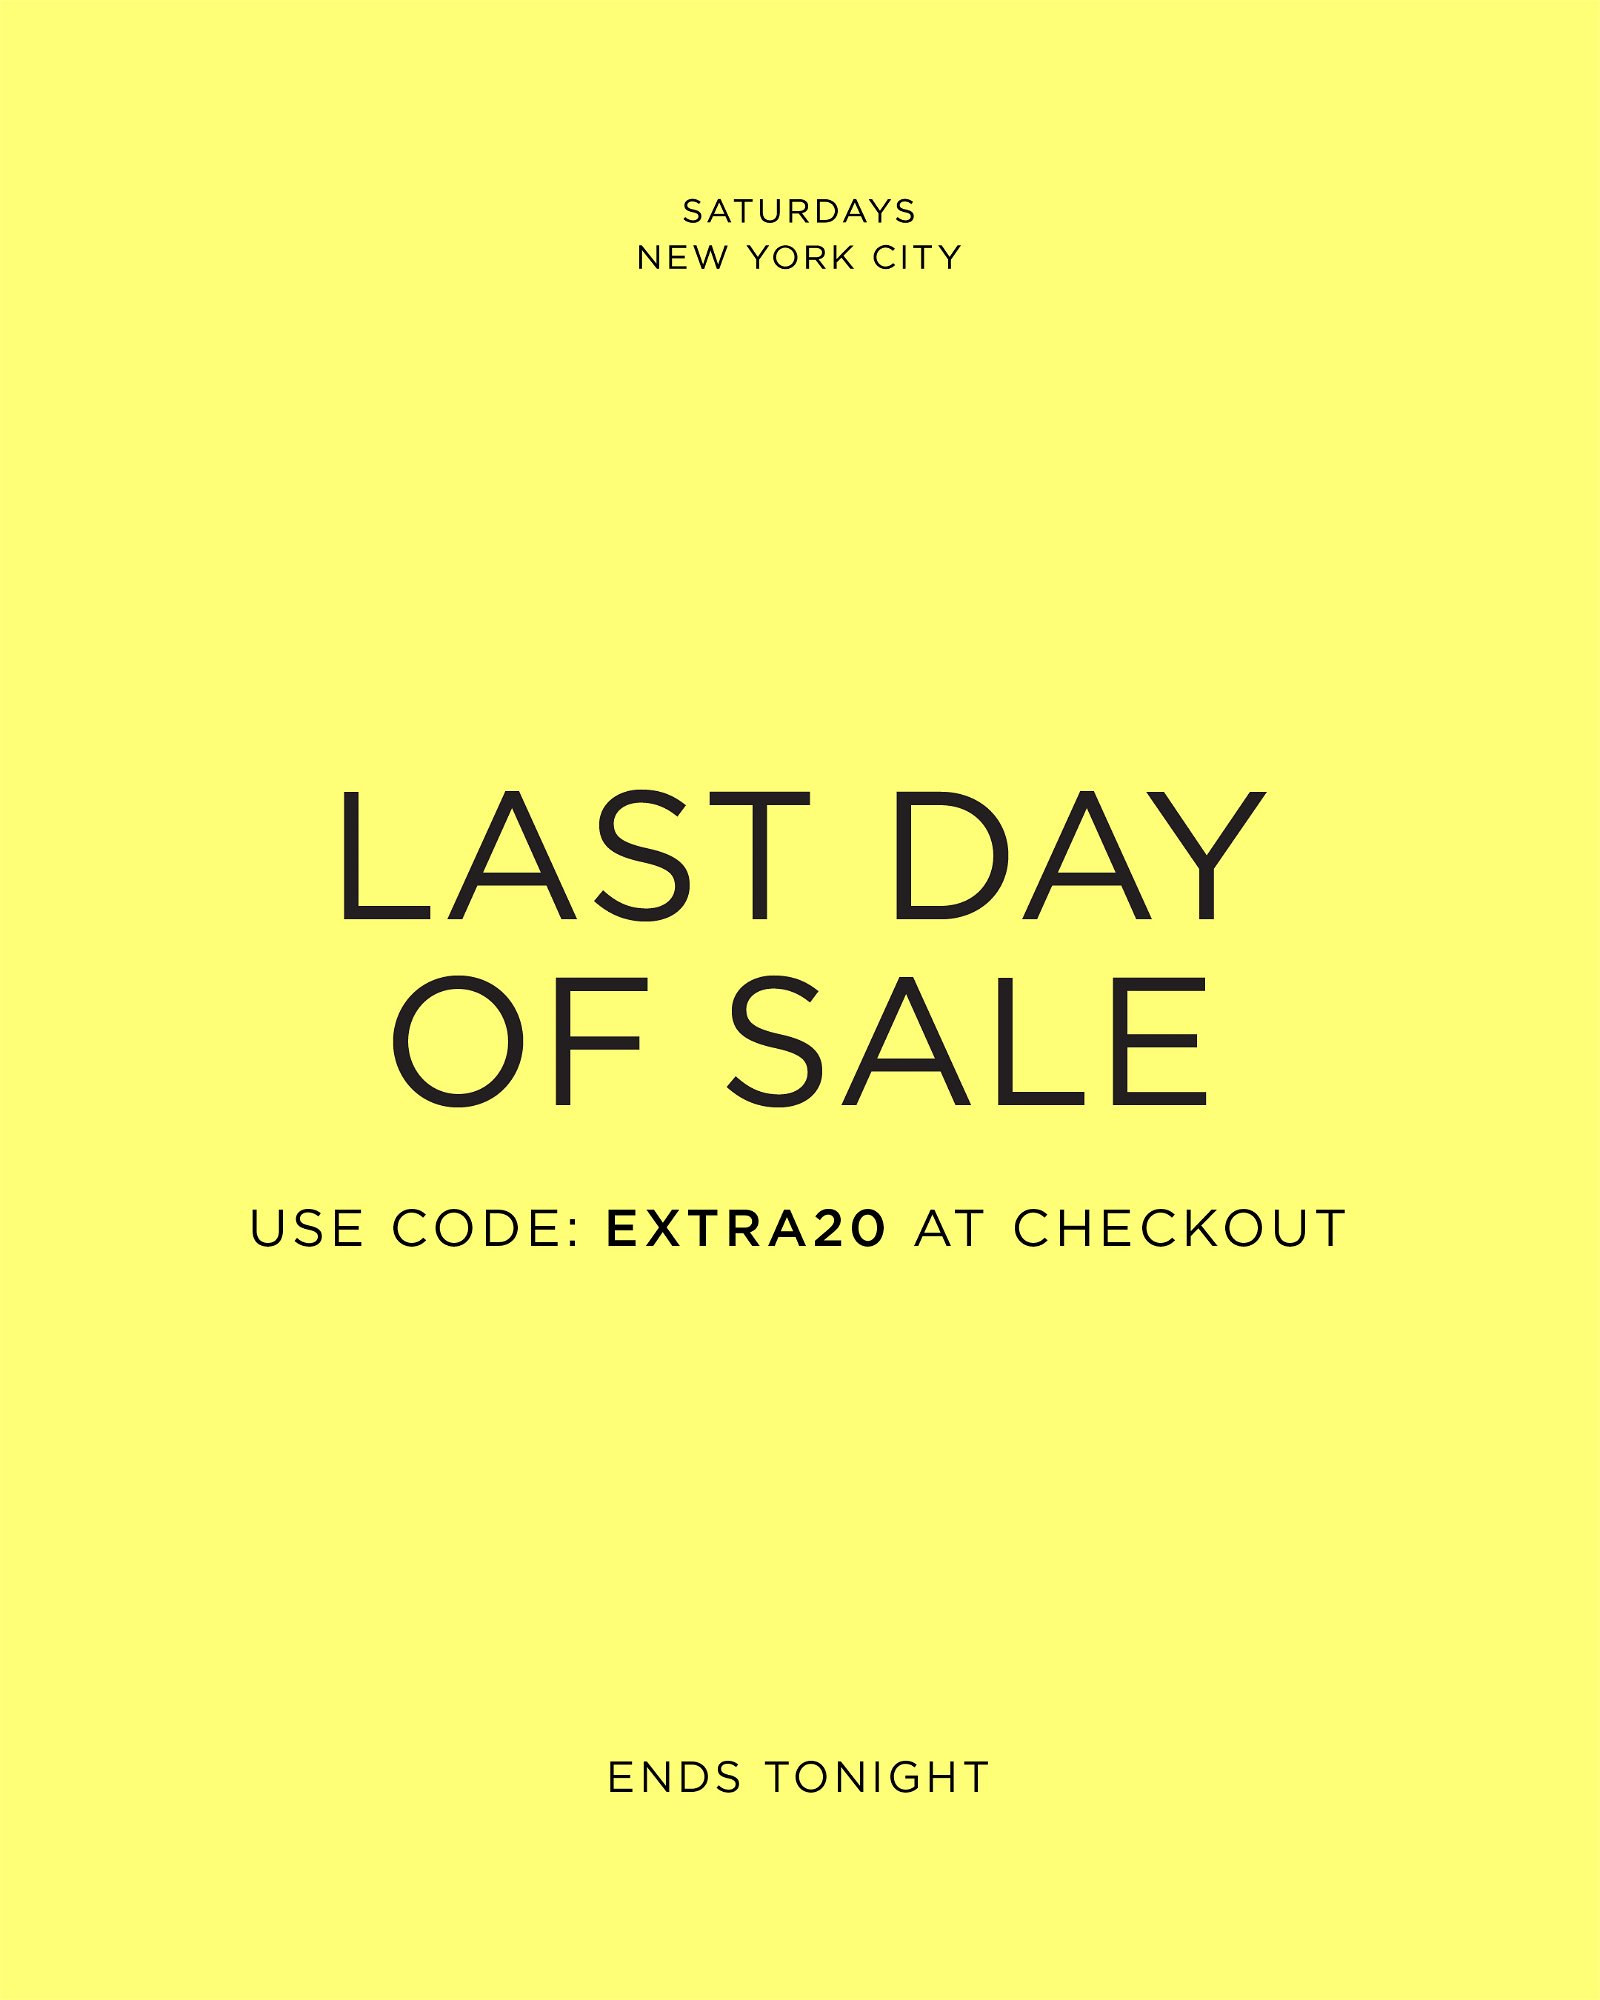 Shop sale, ends tonight. Use code EXTRA20 at checkout.